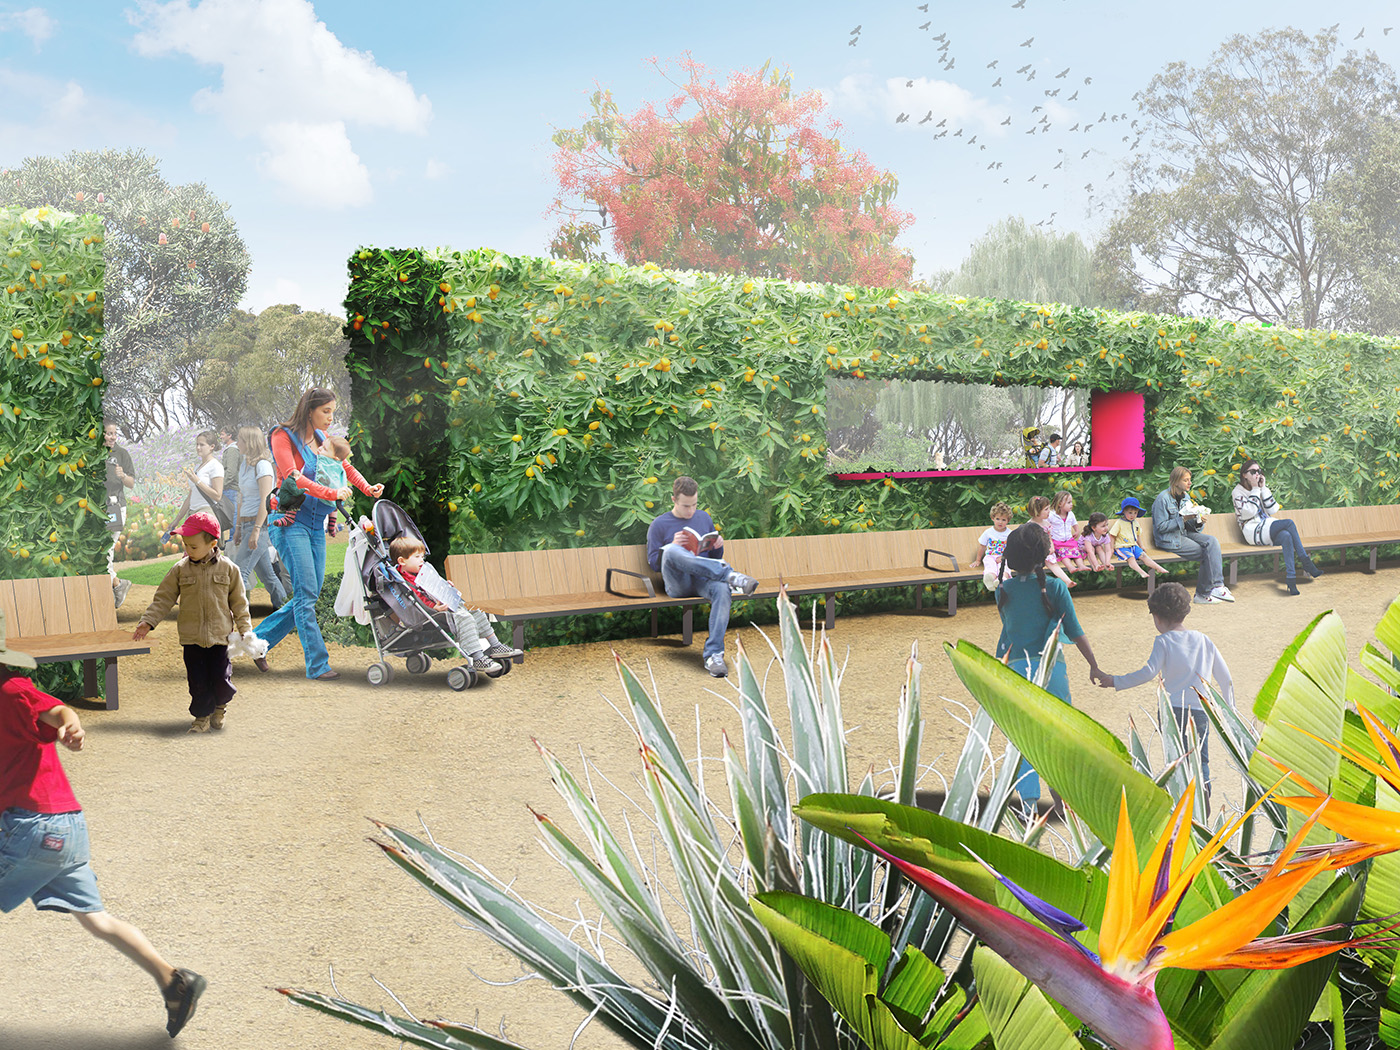 The 3.5-hectare garden is a contemporary, future-focused addition to Bendigo&rsquo;s historic botanic garden precinct that responds to the challenges of climate change in inspiring and immersive ways. Image: Supplied
